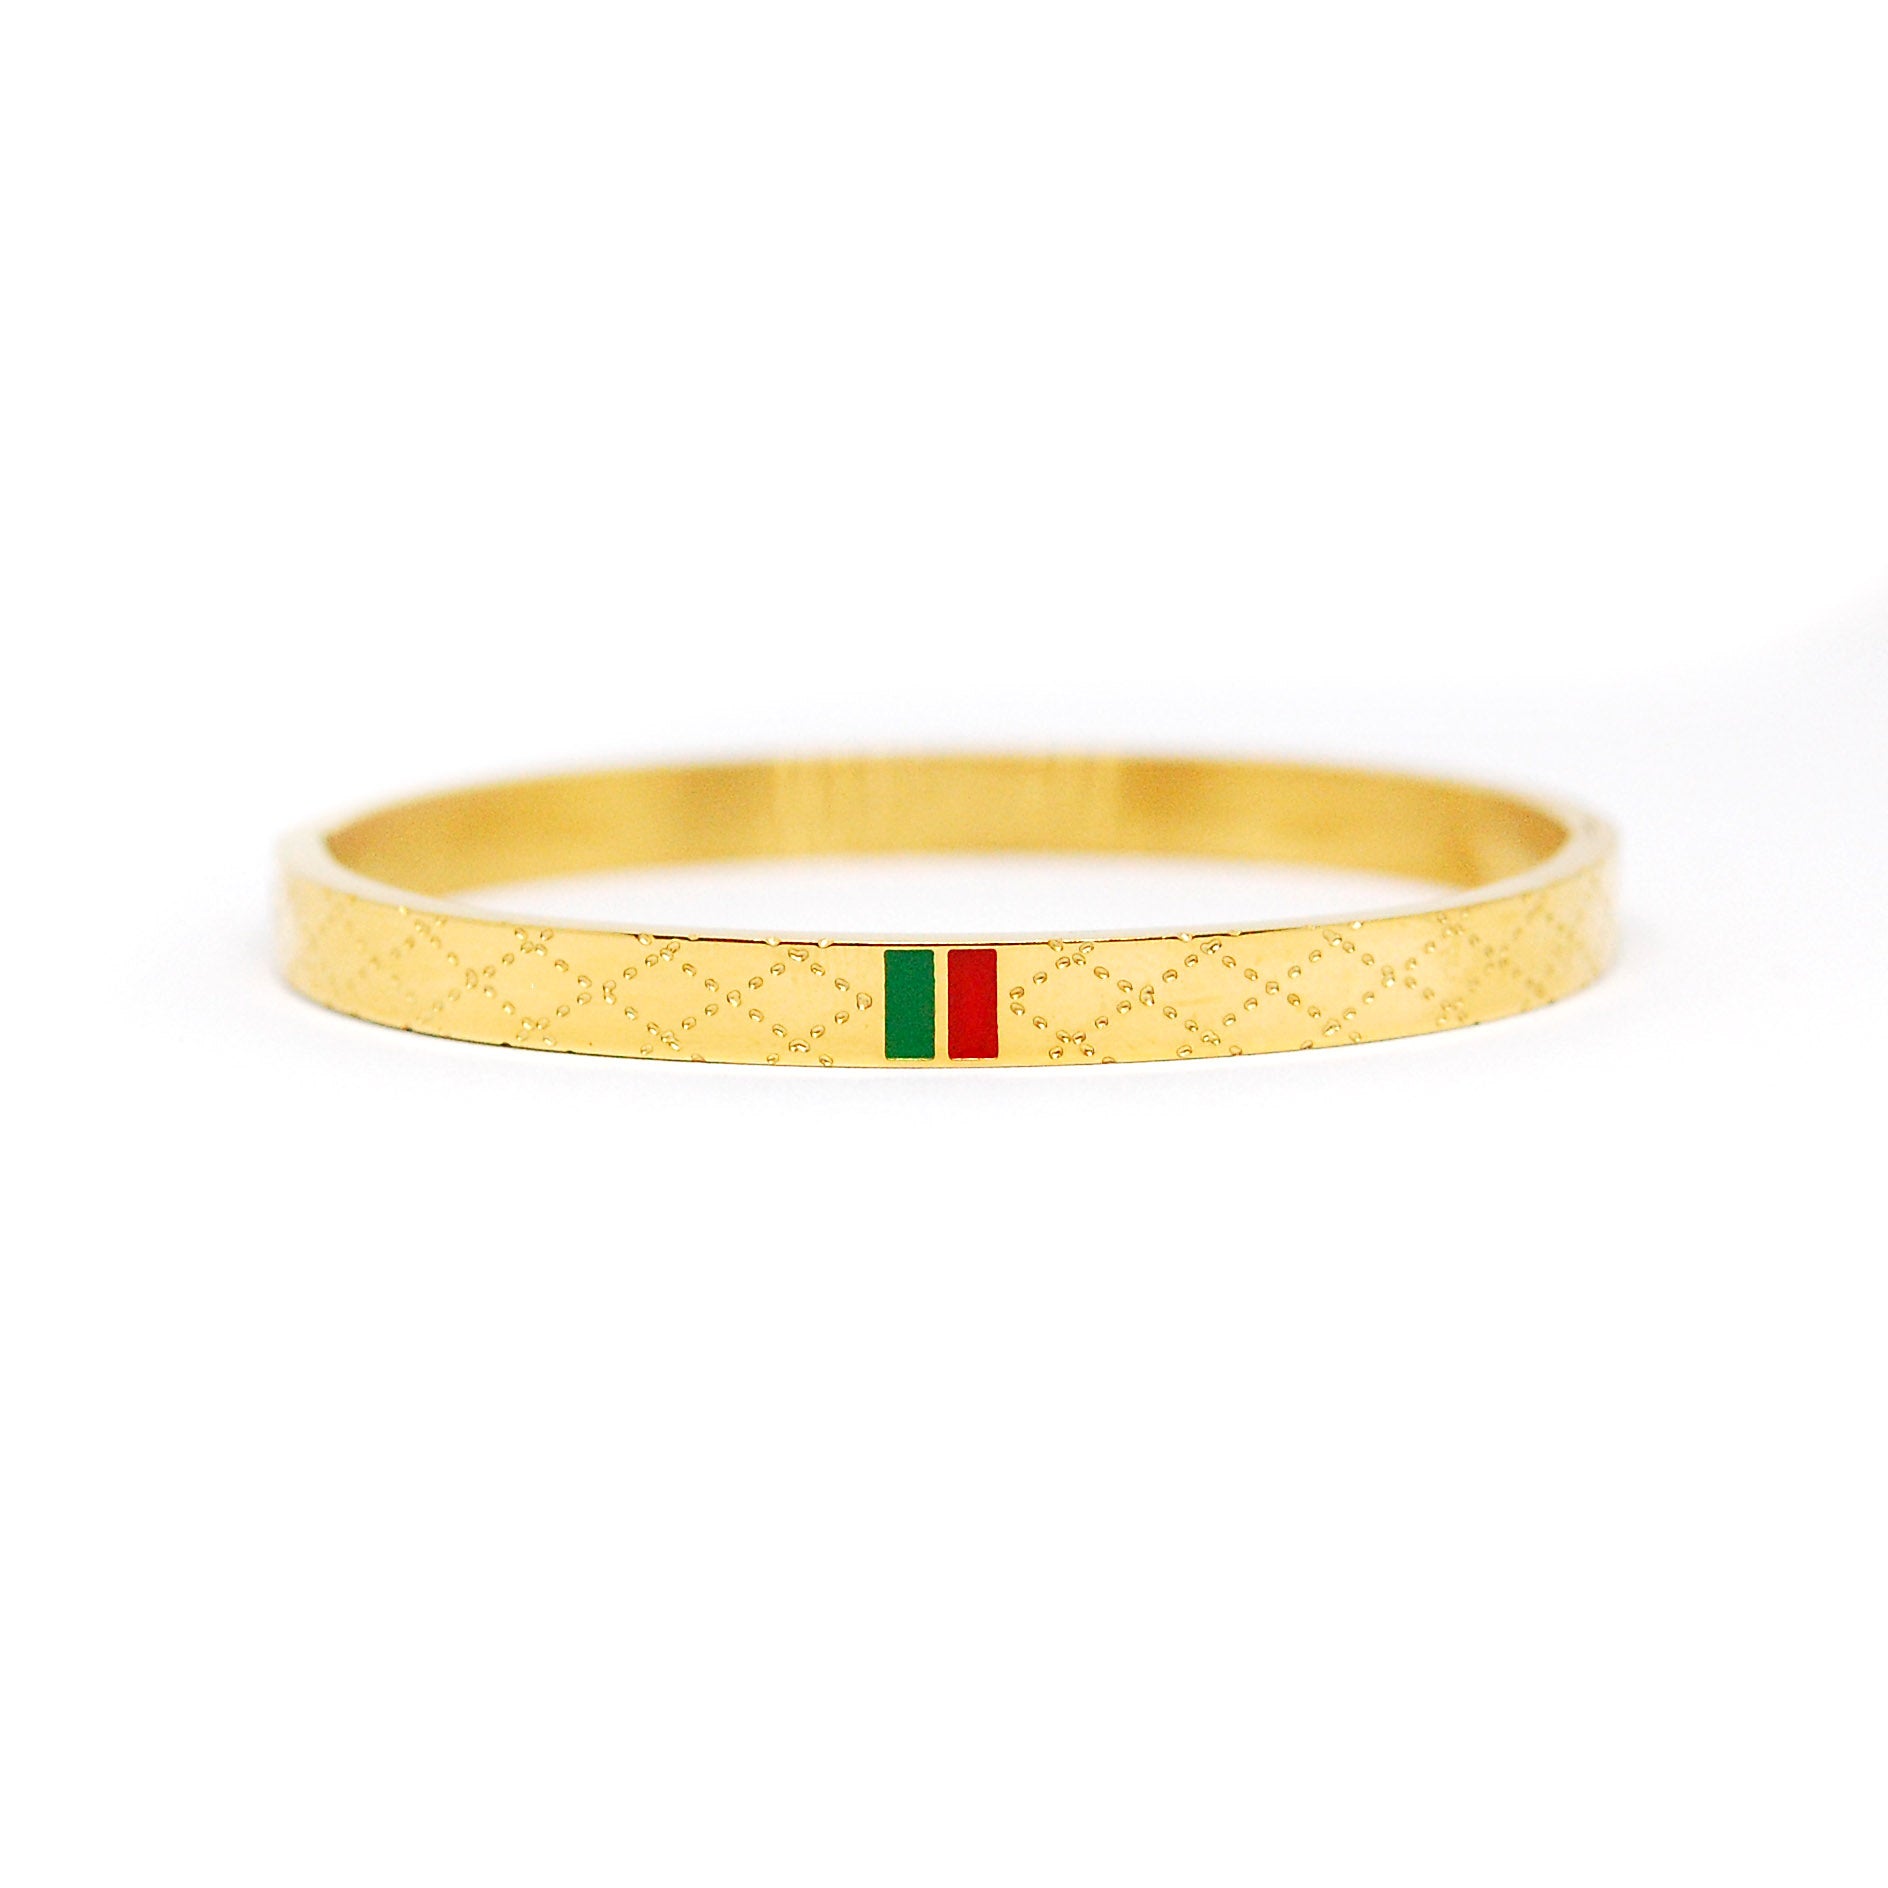 ESBG 7380: Hard Gold-Plated Criss-Cross Bangle w/ Red-Green Bar Accent